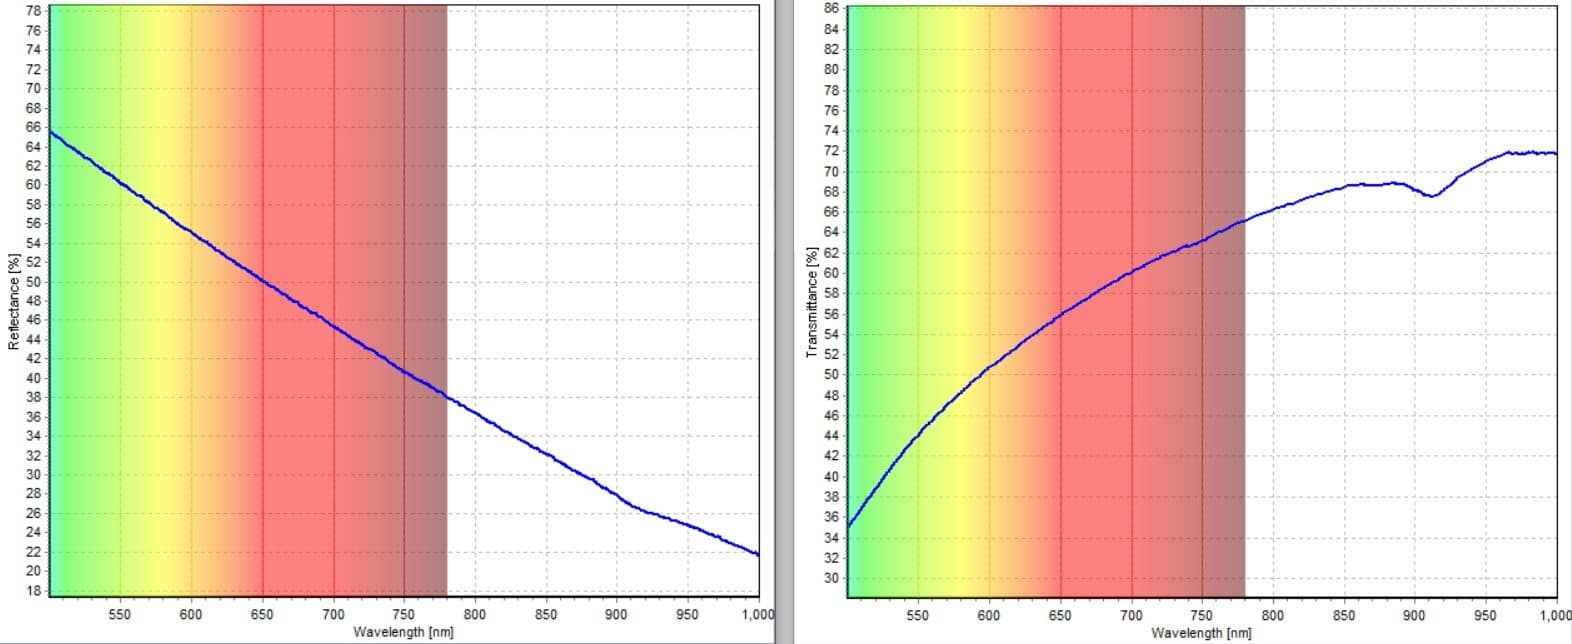 White sample and transmission spectra comparison